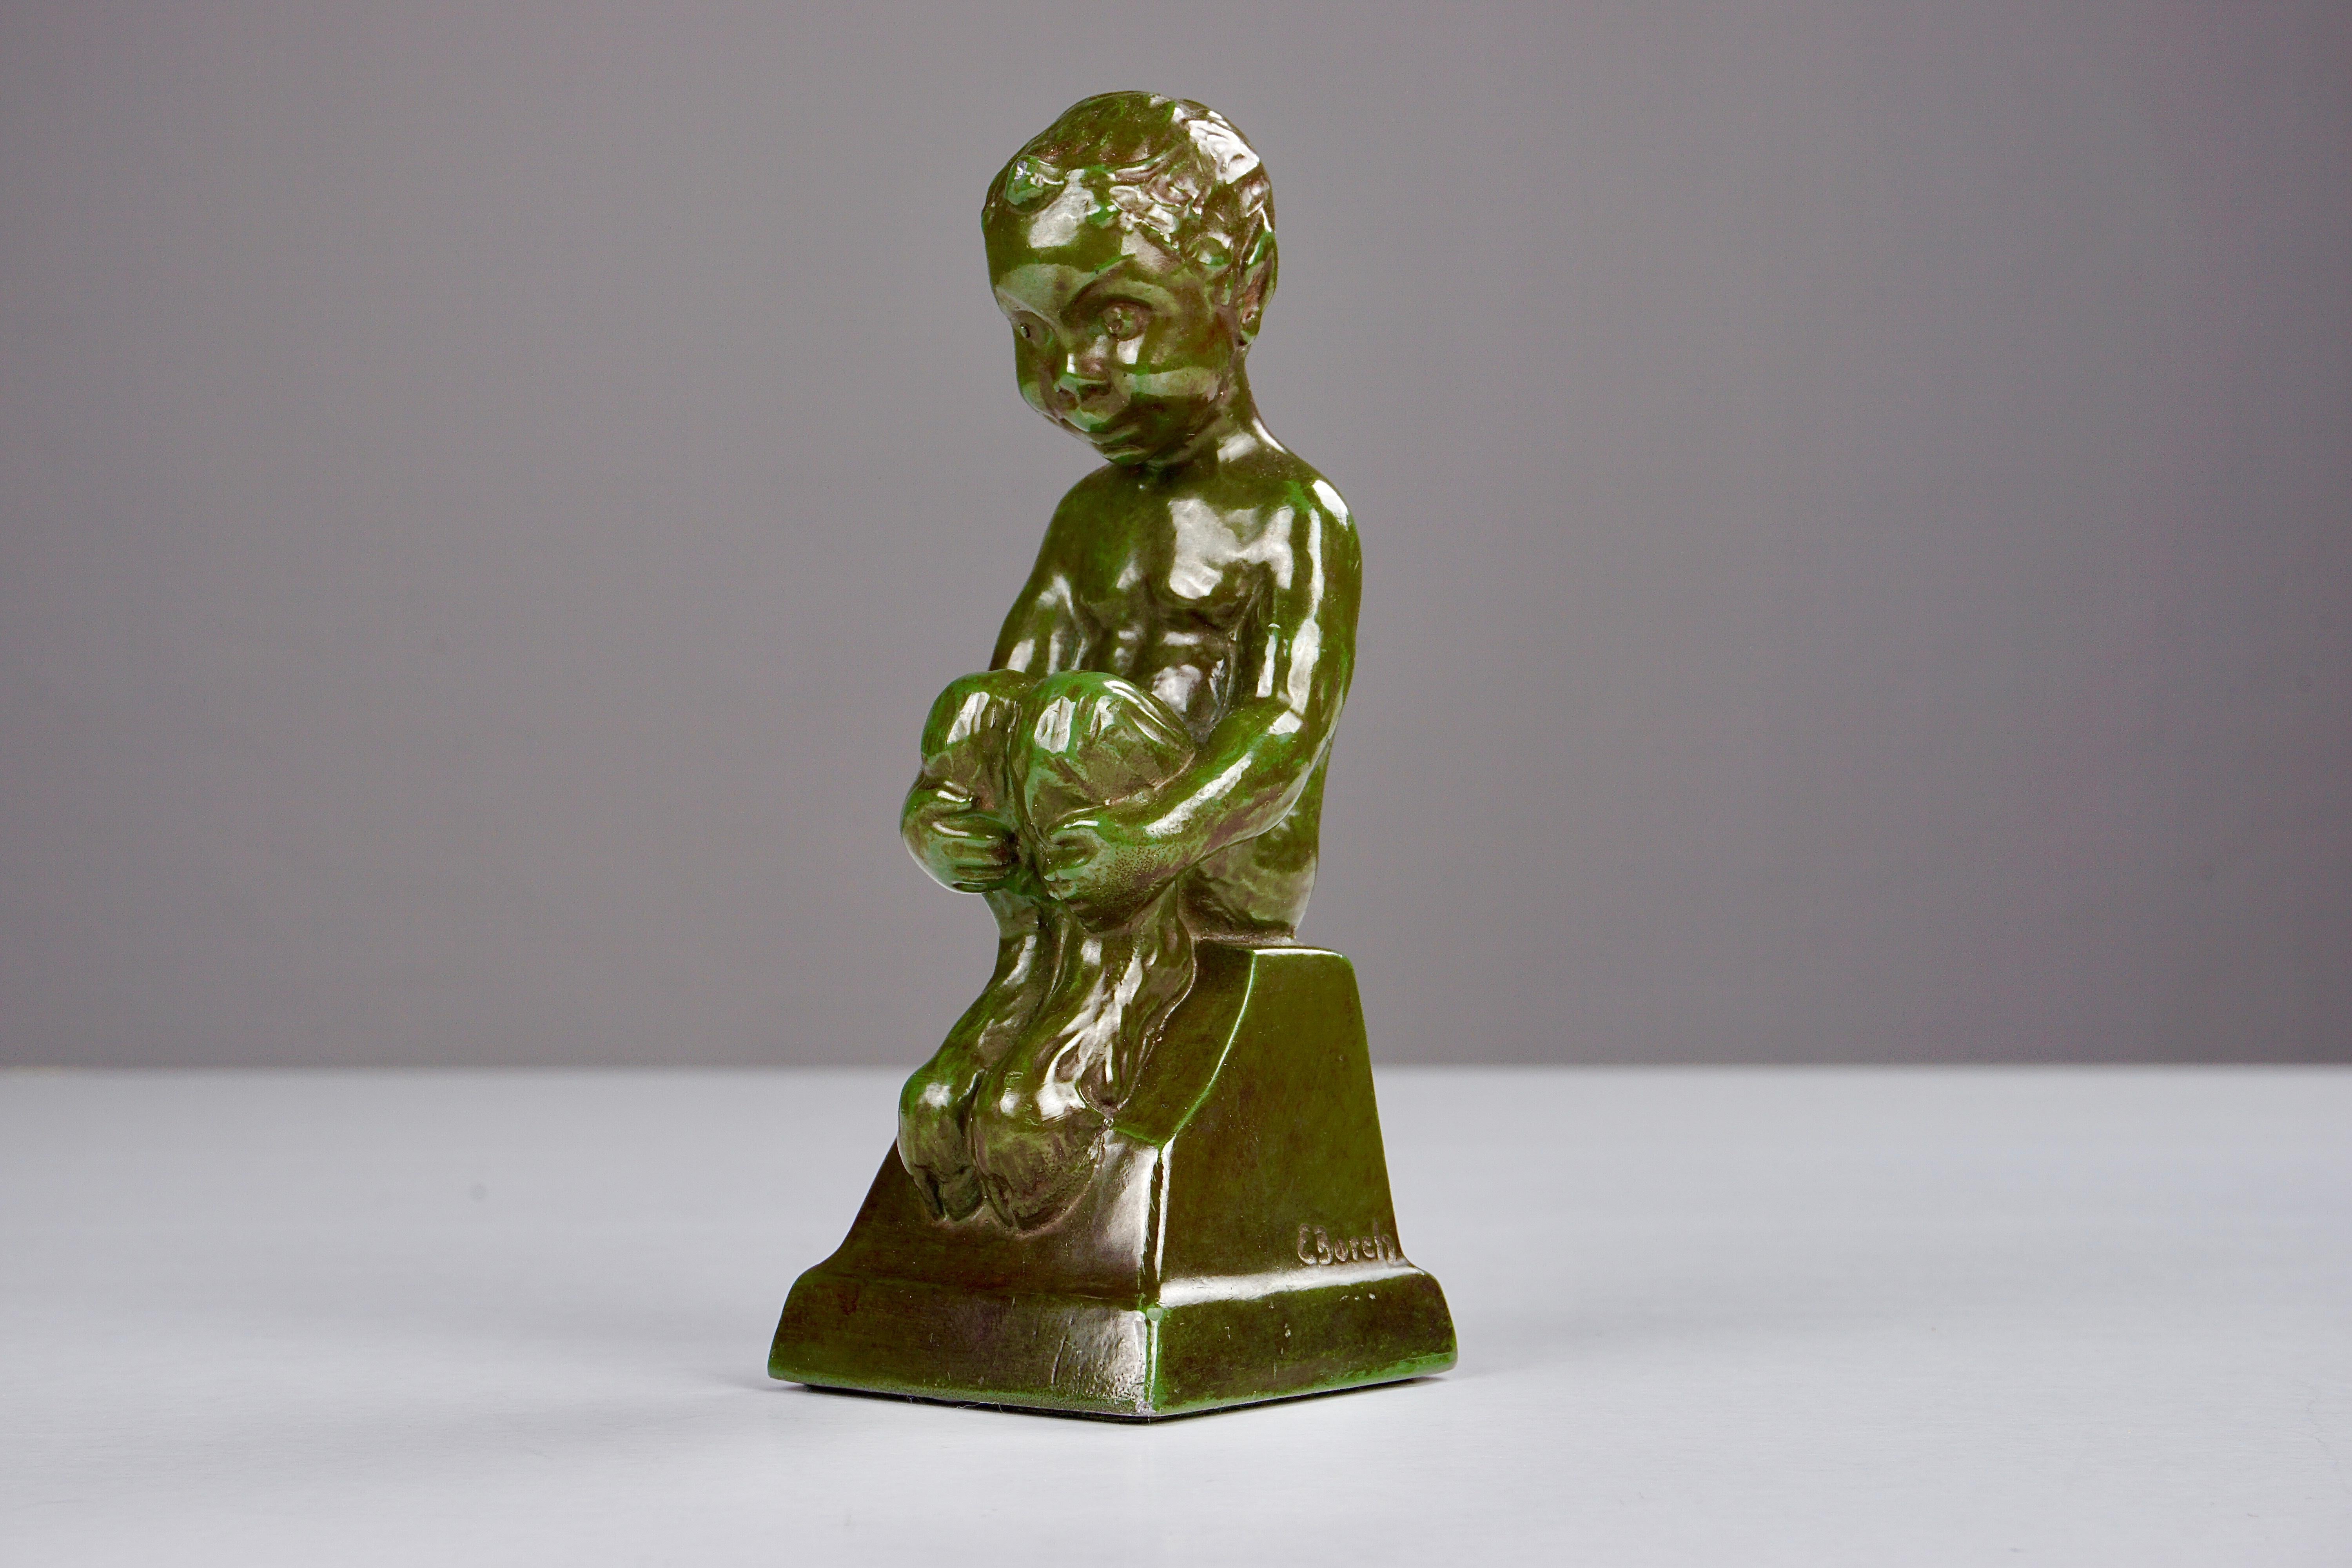 1940's Sitting Faun by Elena Borch made of Disco Metal by Just Andersen A/S

The sitting faun is in good vintage condition and marked with Just. Andersens triangle mark. 

Just Andersen 1884-1943 was born in Godhavn on the Disko island, which is